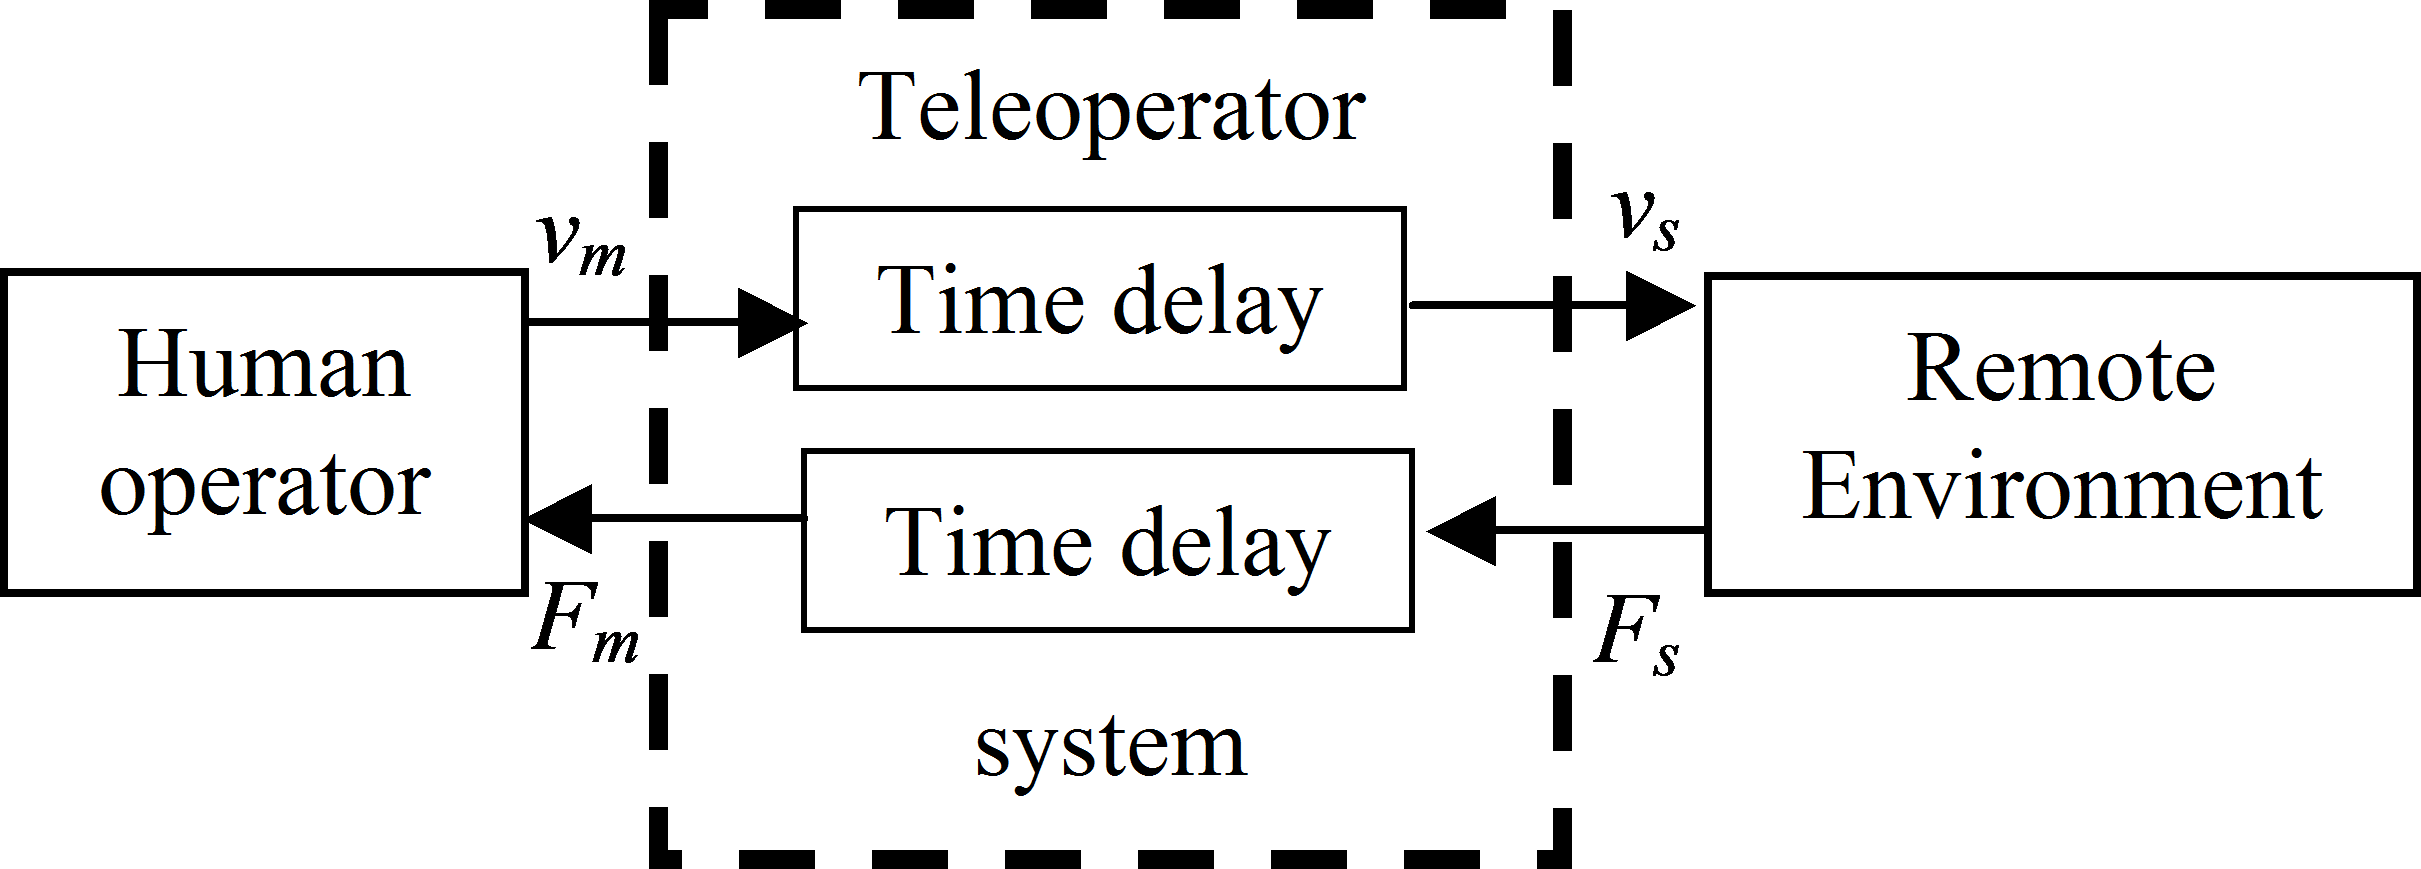 A simple teleoperator with time delay Td.